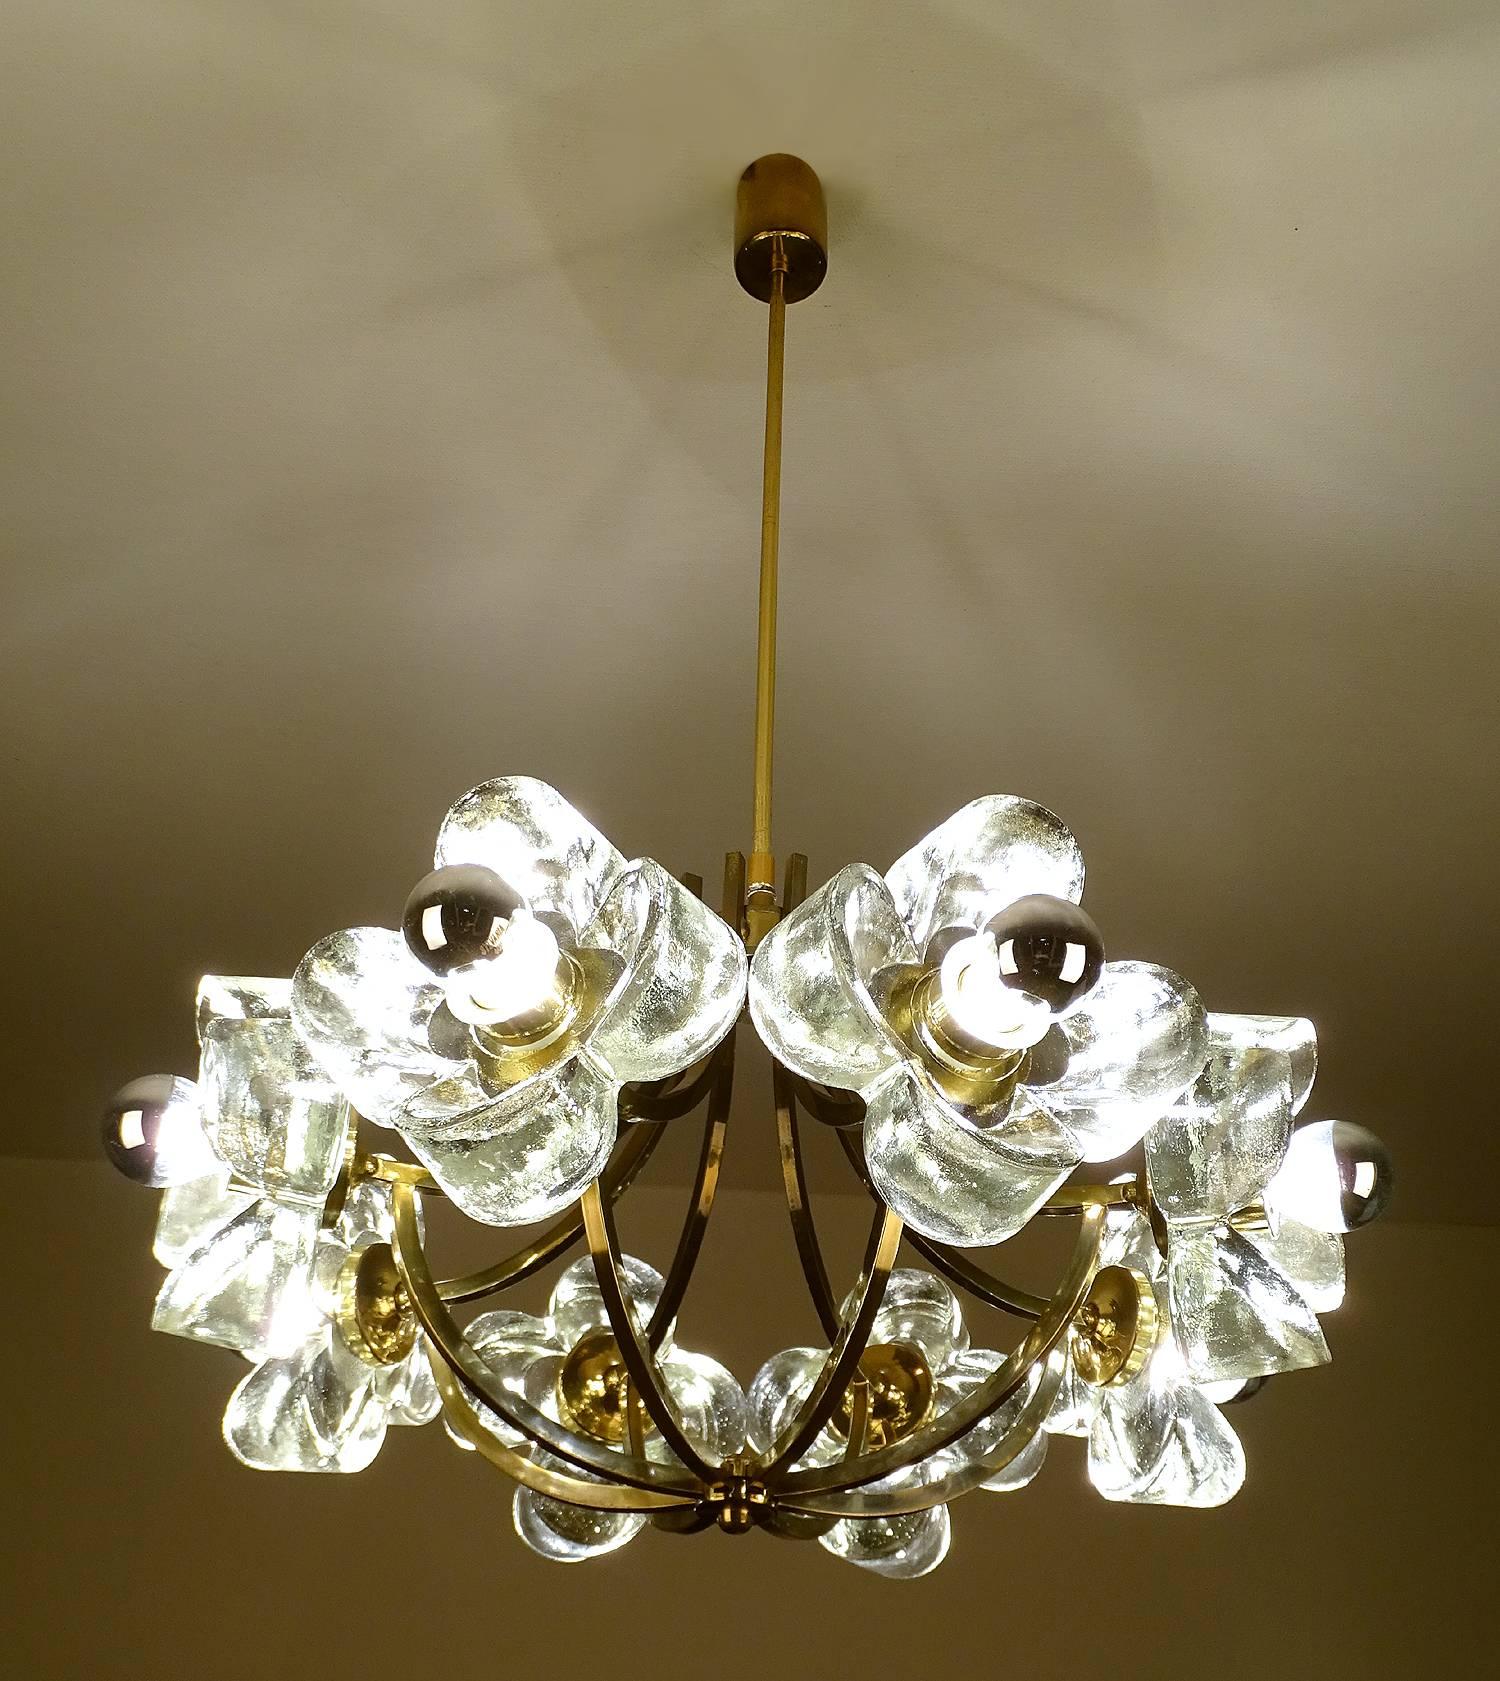 All our lights electricals are checked and tested with 110 and 220 Volts bulbs

Large  chandelier by Simon and Schelle, featuring a basket design brass structure
with eight glass blocks in the shape of a four lobed flower.

Dimensions
27.56 in.H /